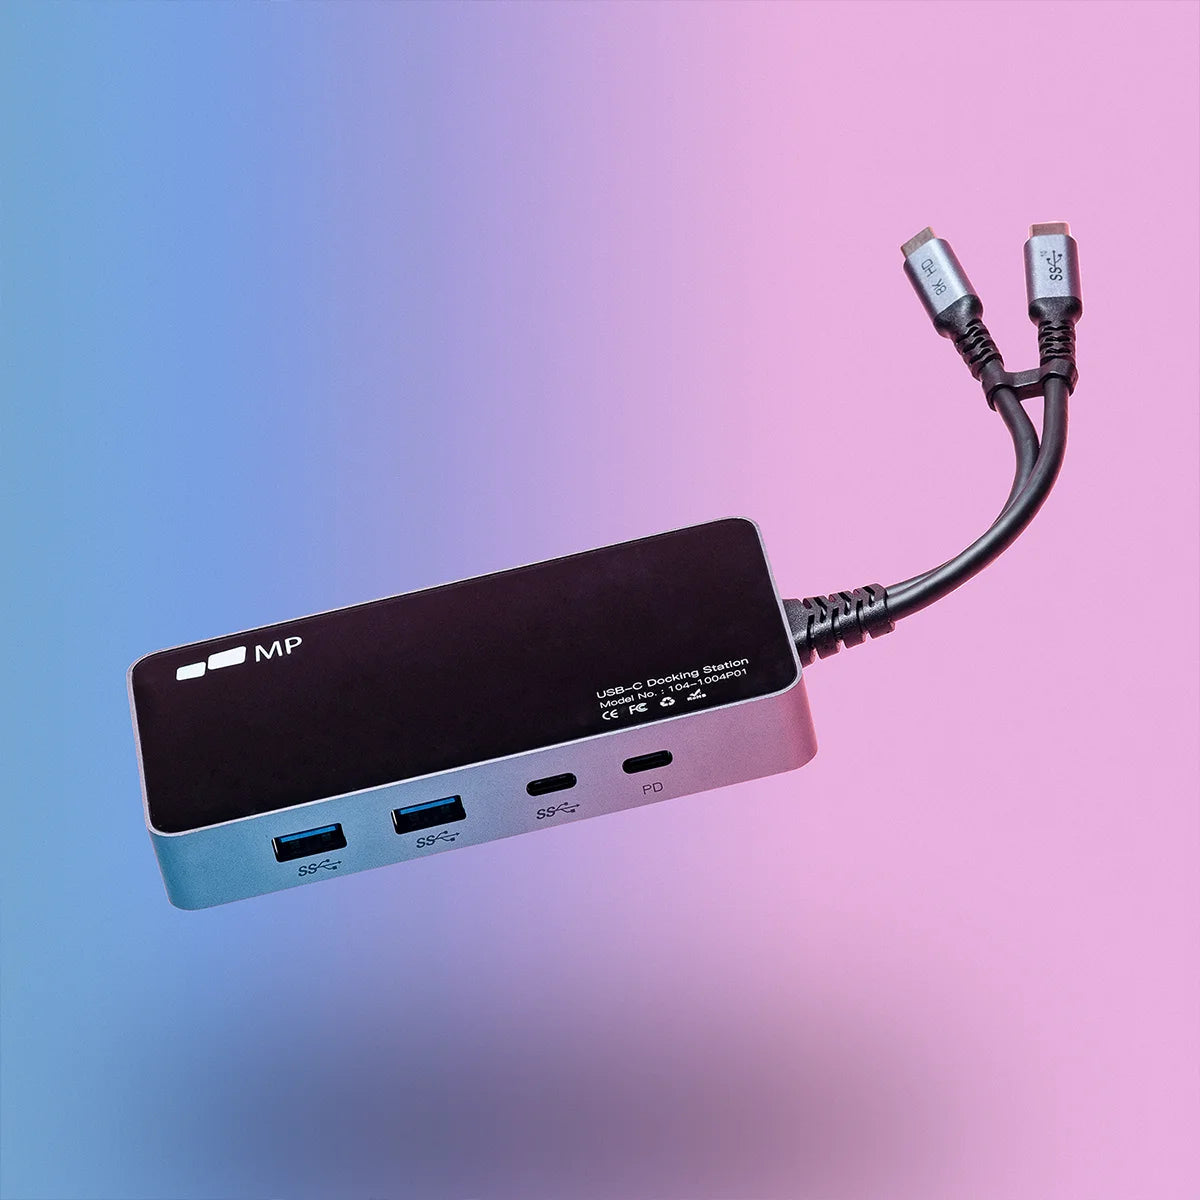 9 in 1 USB-C Hub with 8K HDMI